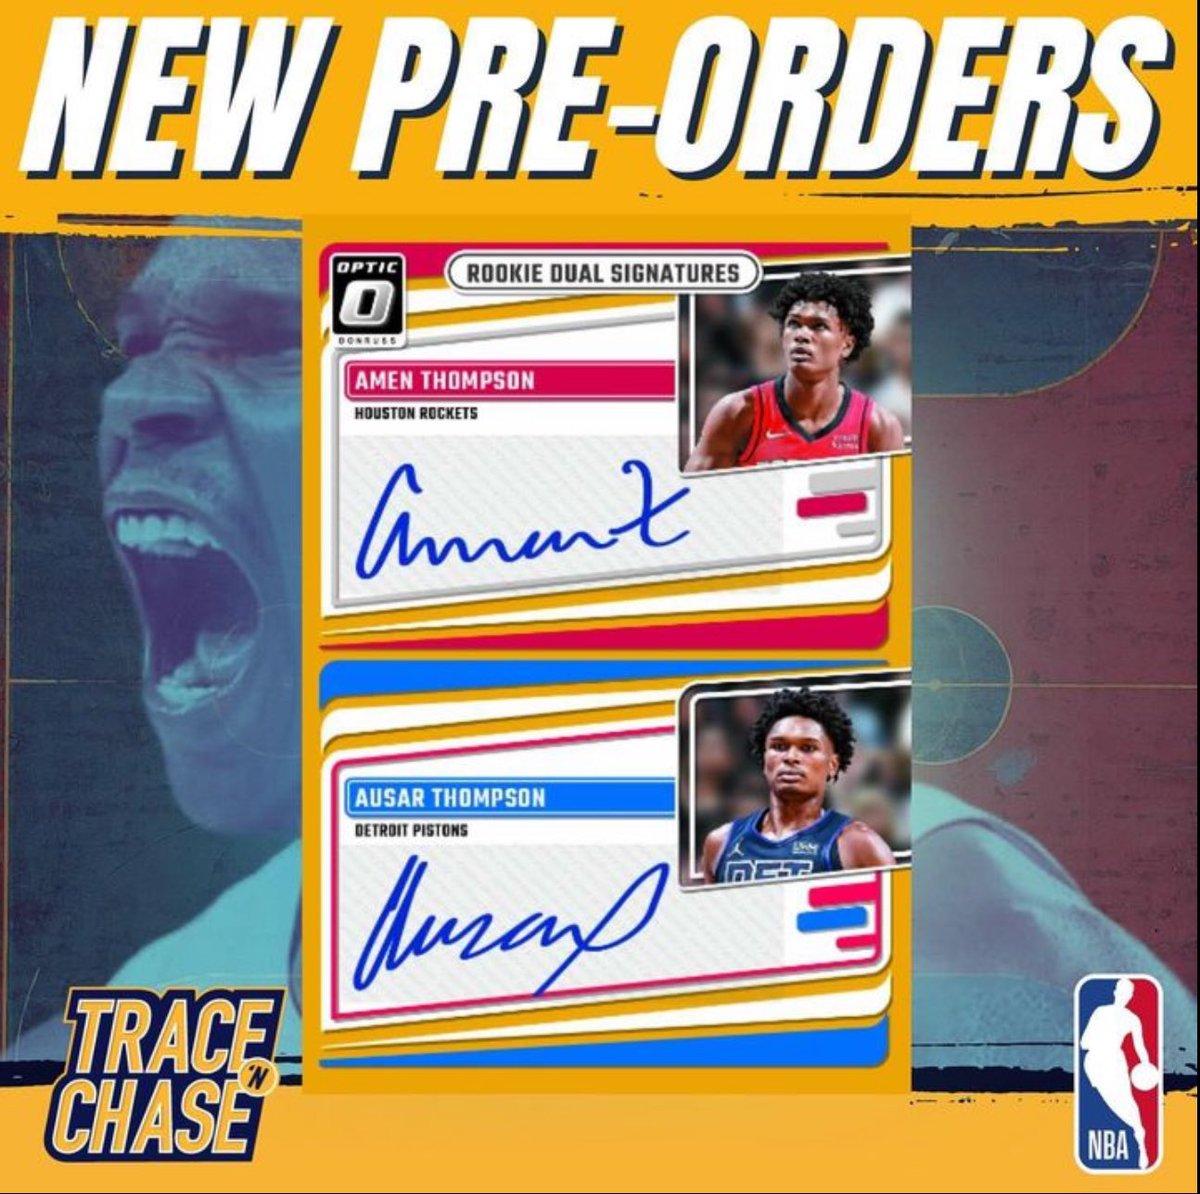 💥Brand New Donruss Optic available for Pre-orders🏀 Few boxes left on our website 👉 tinyurl.com/mr3t73c7 #thehobby #sportscardscollectors #memorabilia #whodoyoucollect #showyourhits #RC #paniniamerica #nba #tracenchase #tracenchaseskg #bgs #psa #bycollectorsforcollectors